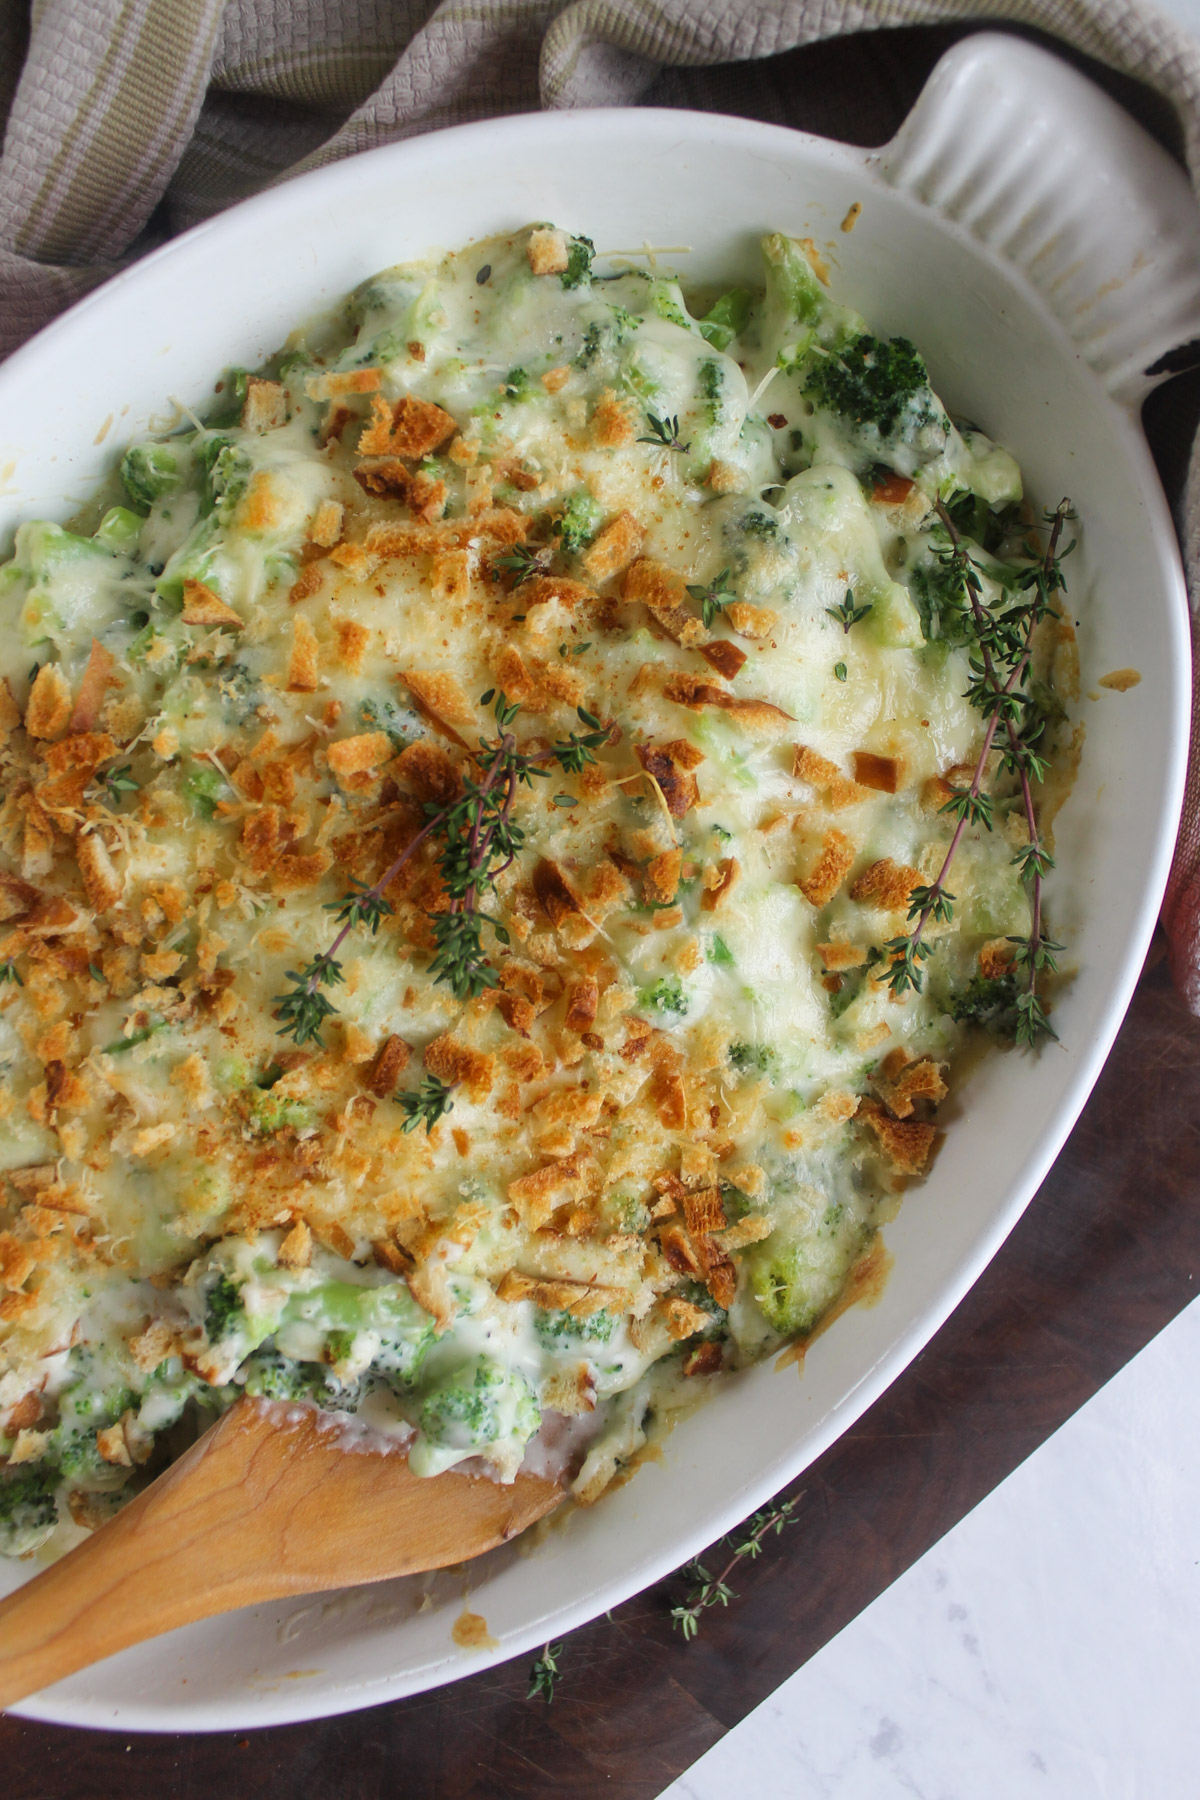 A dish of baked broccoli and white cheddar cheese casserole browned on top.